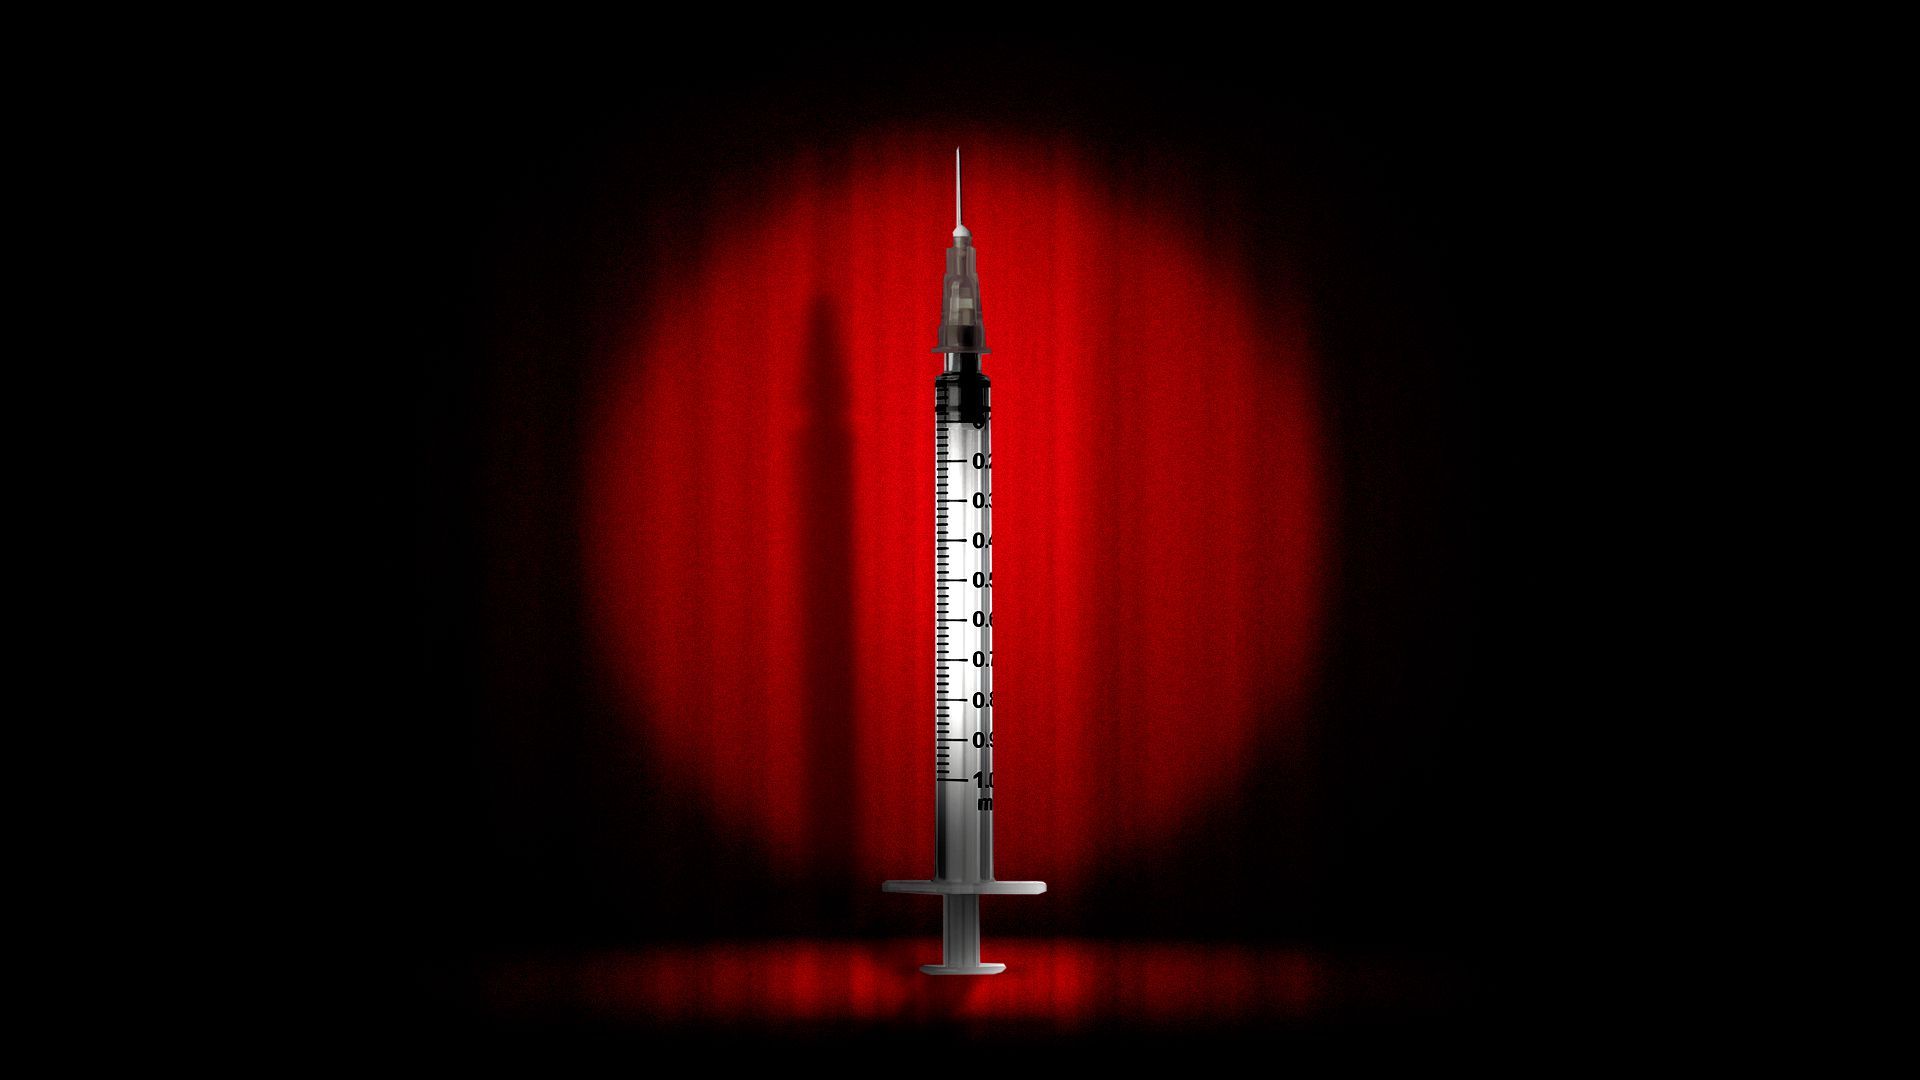 Illustration of a vaccine syringe on a performance stage